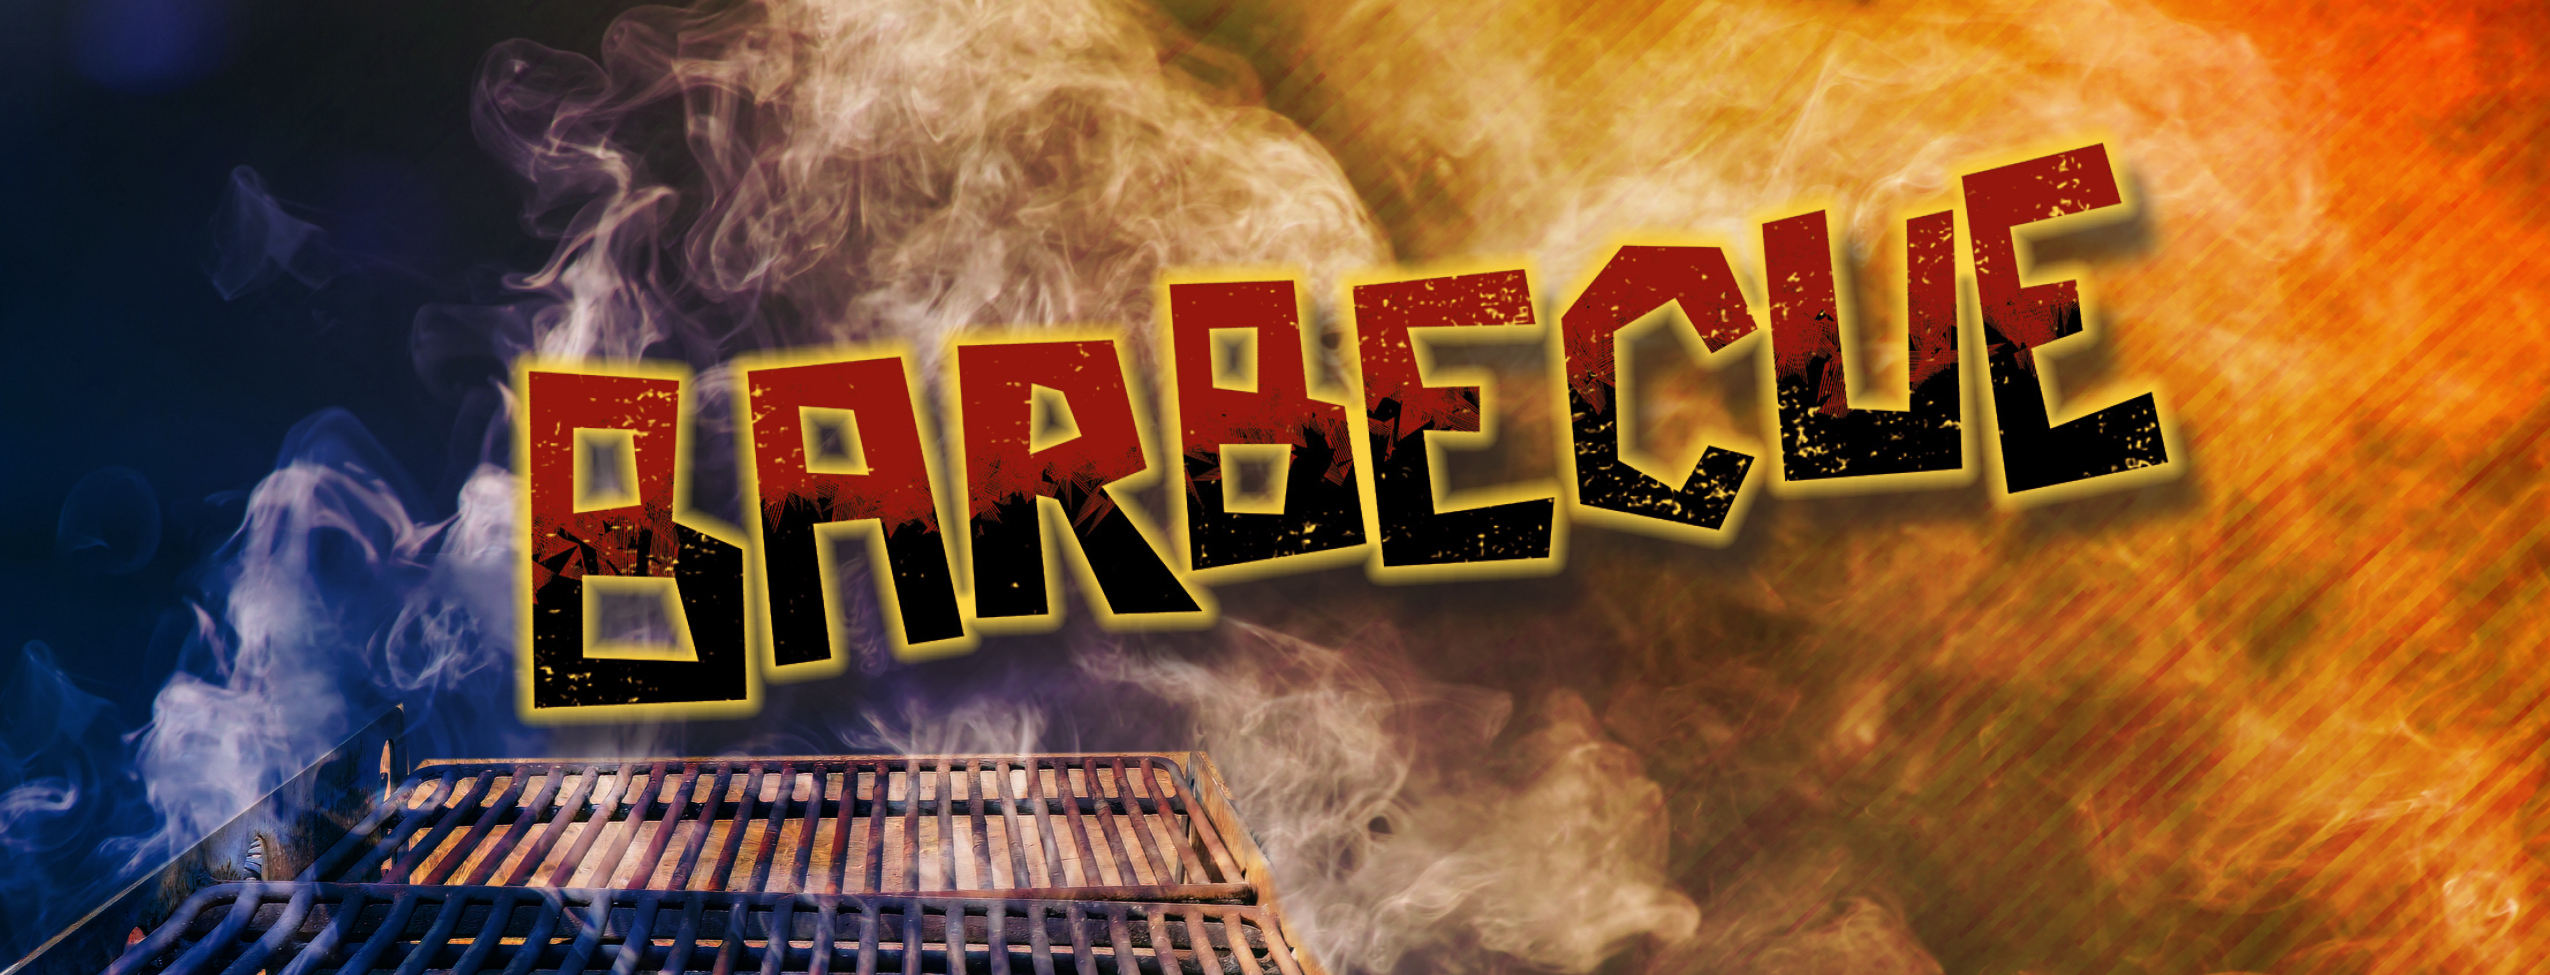 The title "Barbecue" is shown in singed letters. In the background, smoke rises over a burning sky.